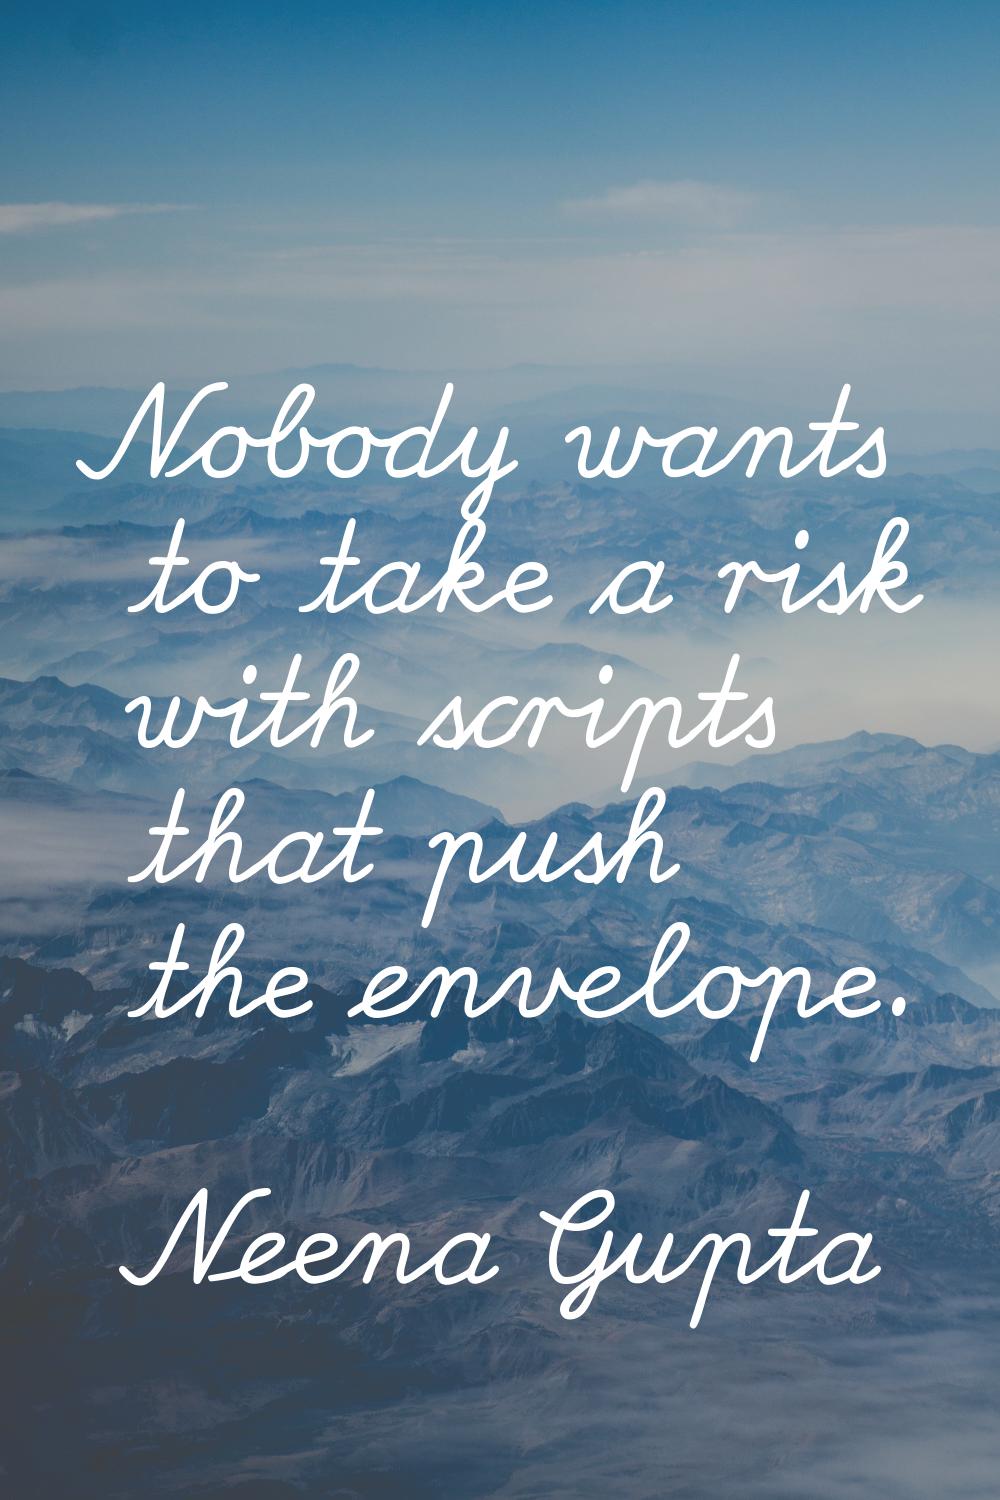 Nobody wants to take a risk with scripts that push the envelope.